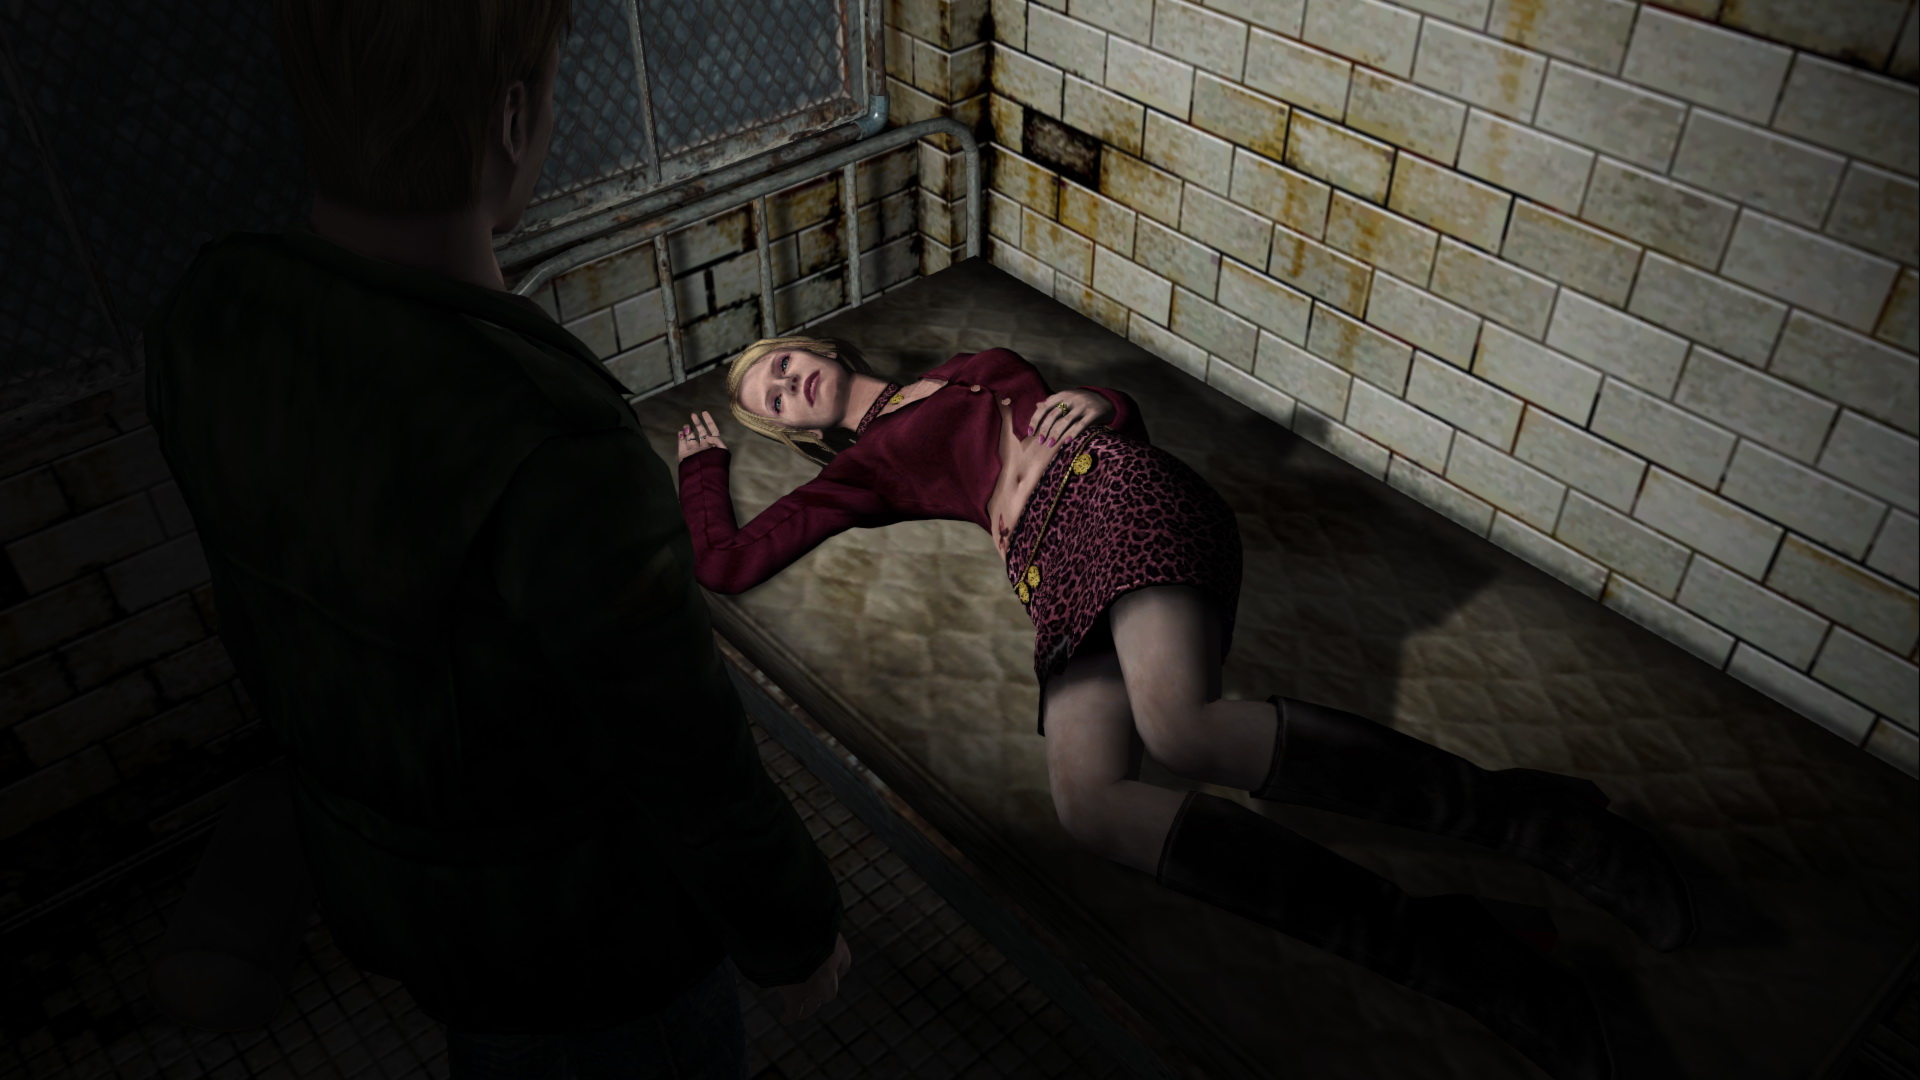 Silent Hill 2: Enhanced Edition on X: 3/3. With the inclusion of